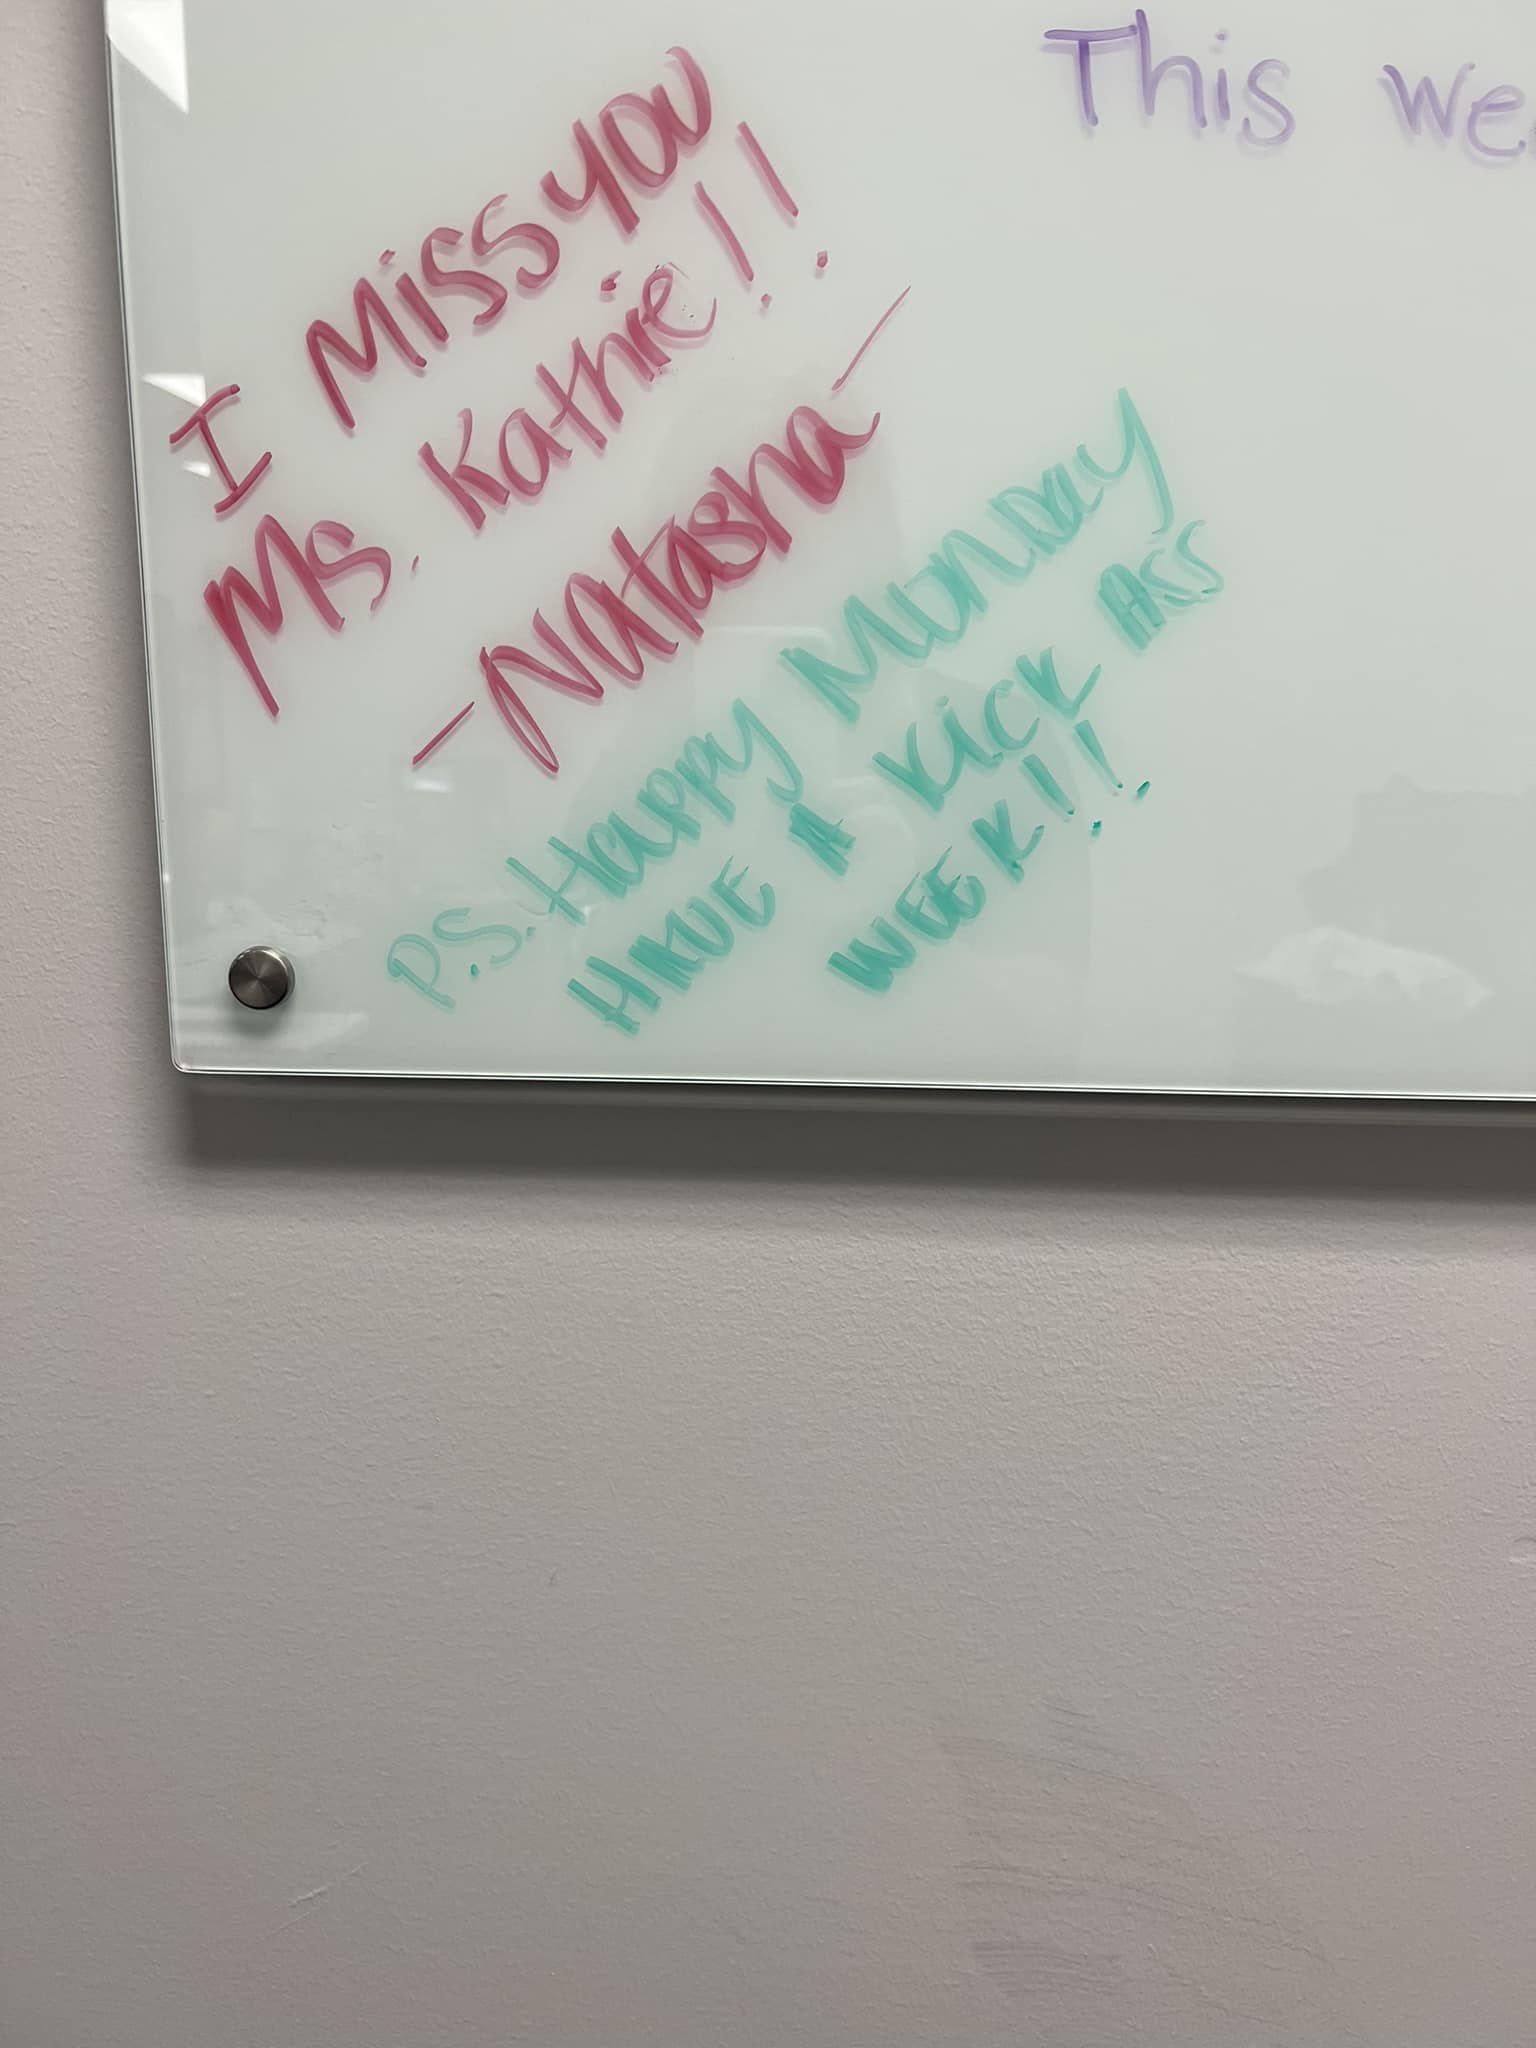 It’s always nice to come to work on a Monday and see this!!! I miss you too Natasha hope you get an hour lunch soon!!!?